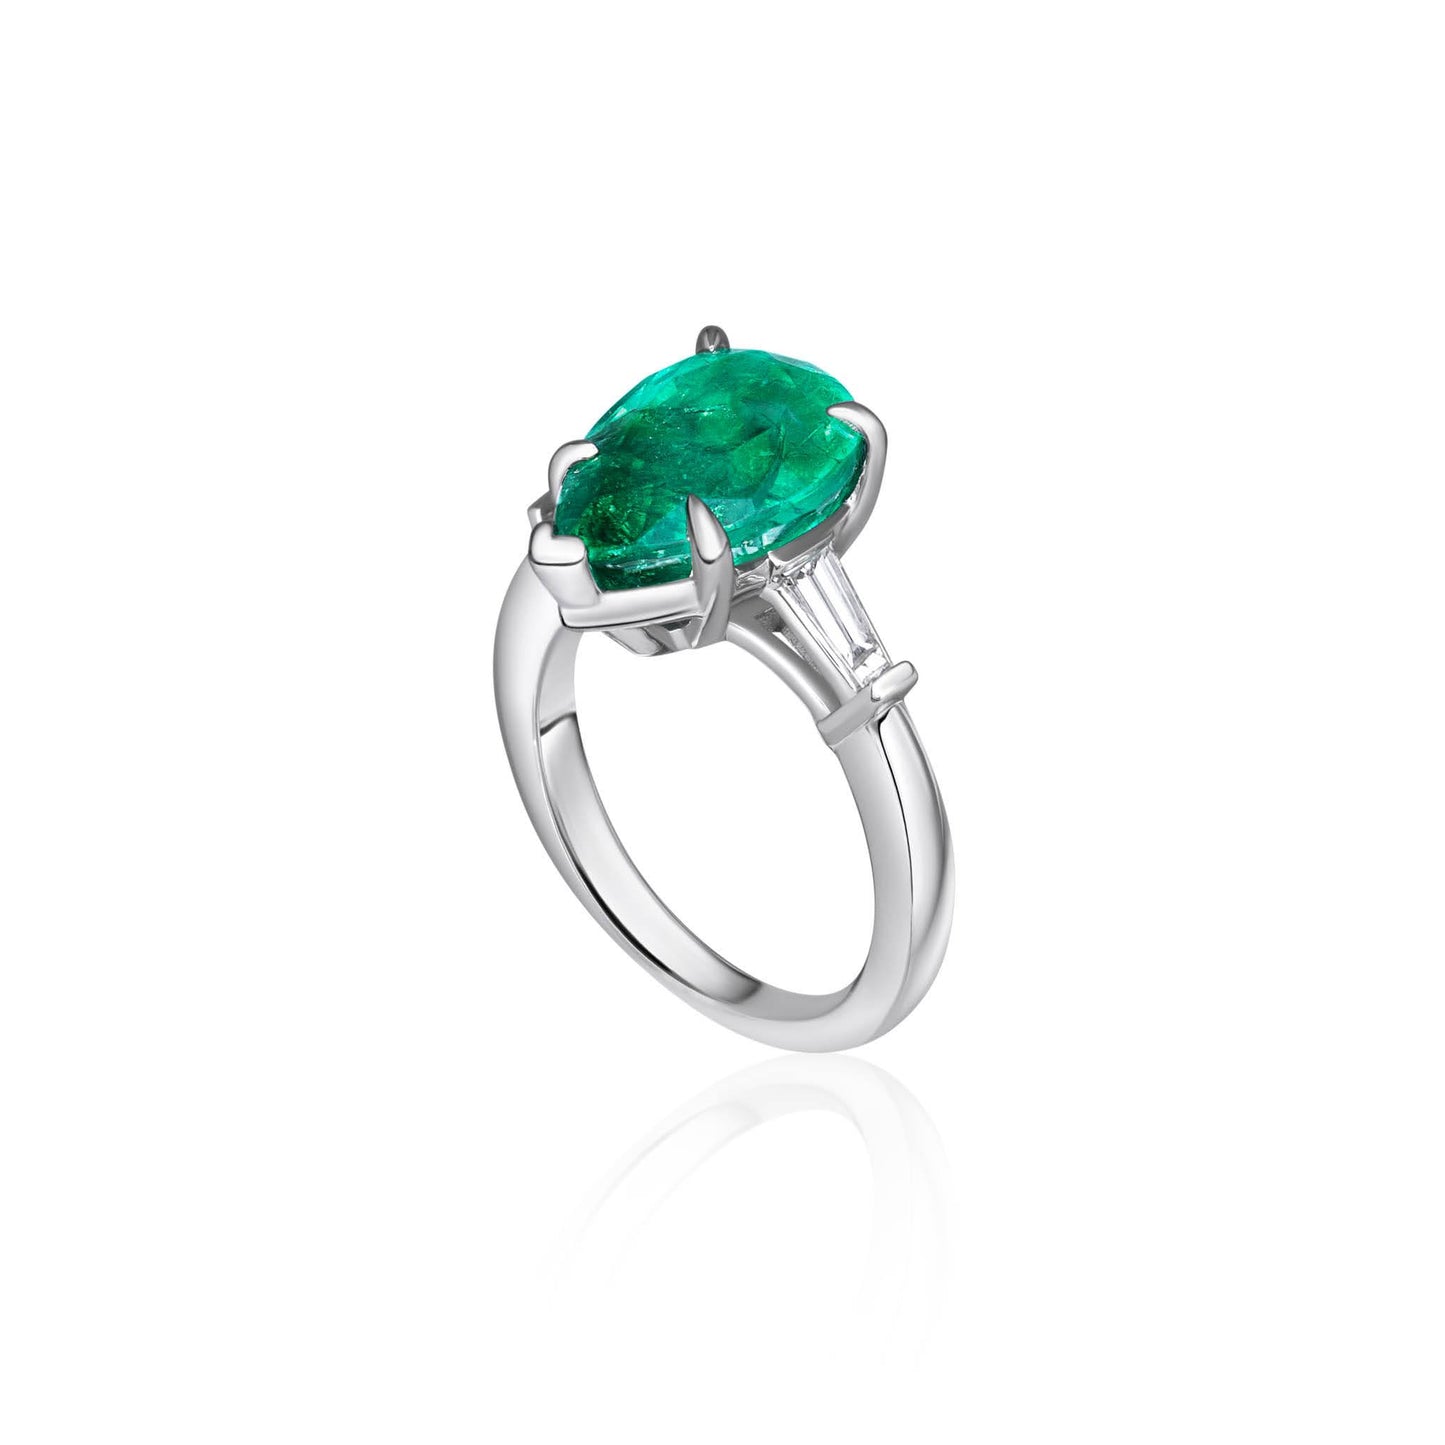 Pear-Shaped Emerald Ring